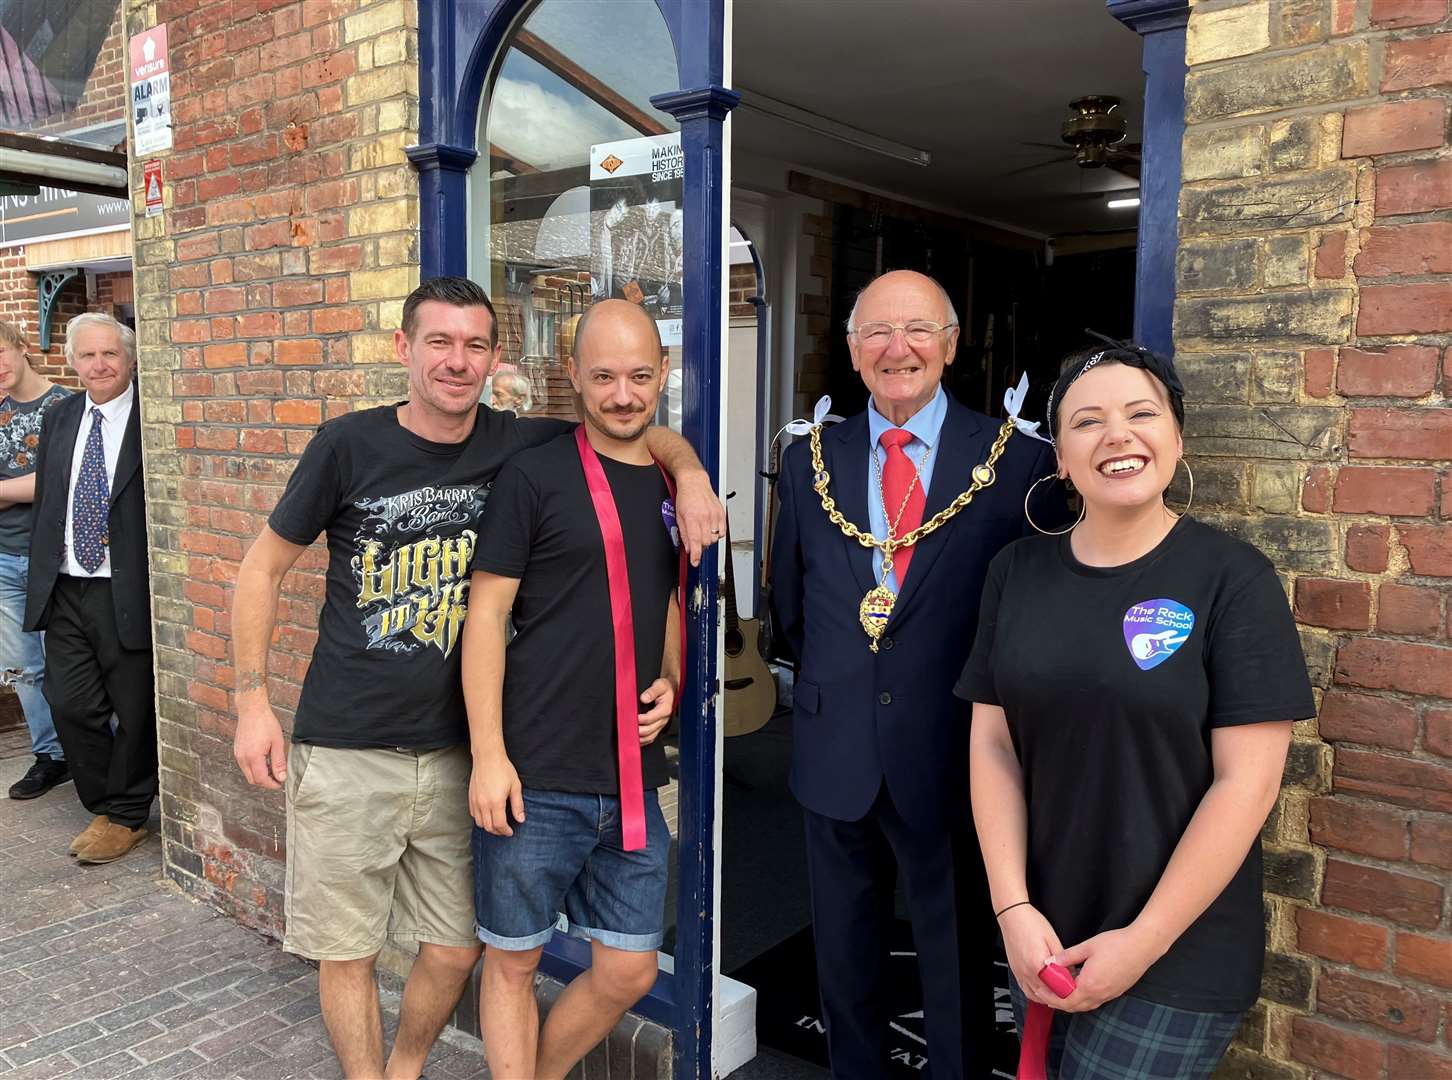 The Mayor of Maidstone Gordon Newton (centre) with (left-right) Steve Wright, director of Toothless Music, and Rock Music School co-directors Kim Blundell and Katie Lawrance